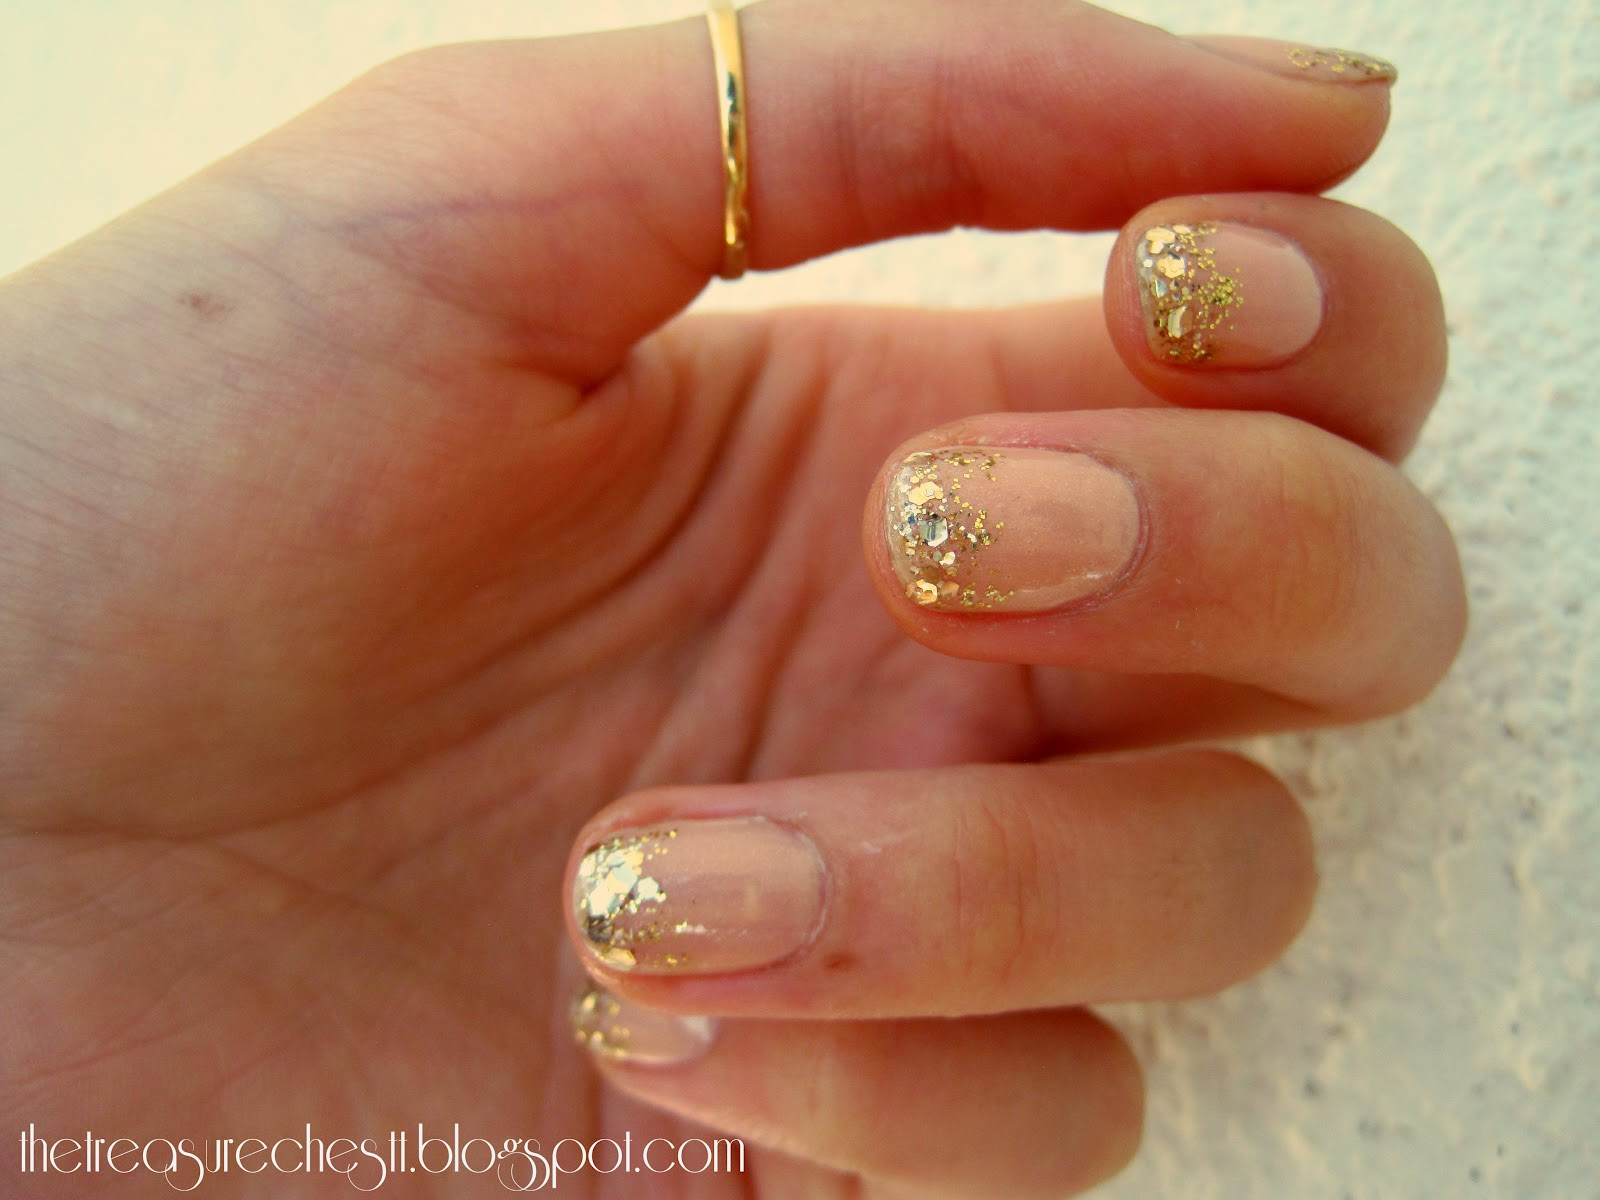 Nude Nails With Gold Glitter
 The Treasure Chest Prettiest Nails I ve Ever Had